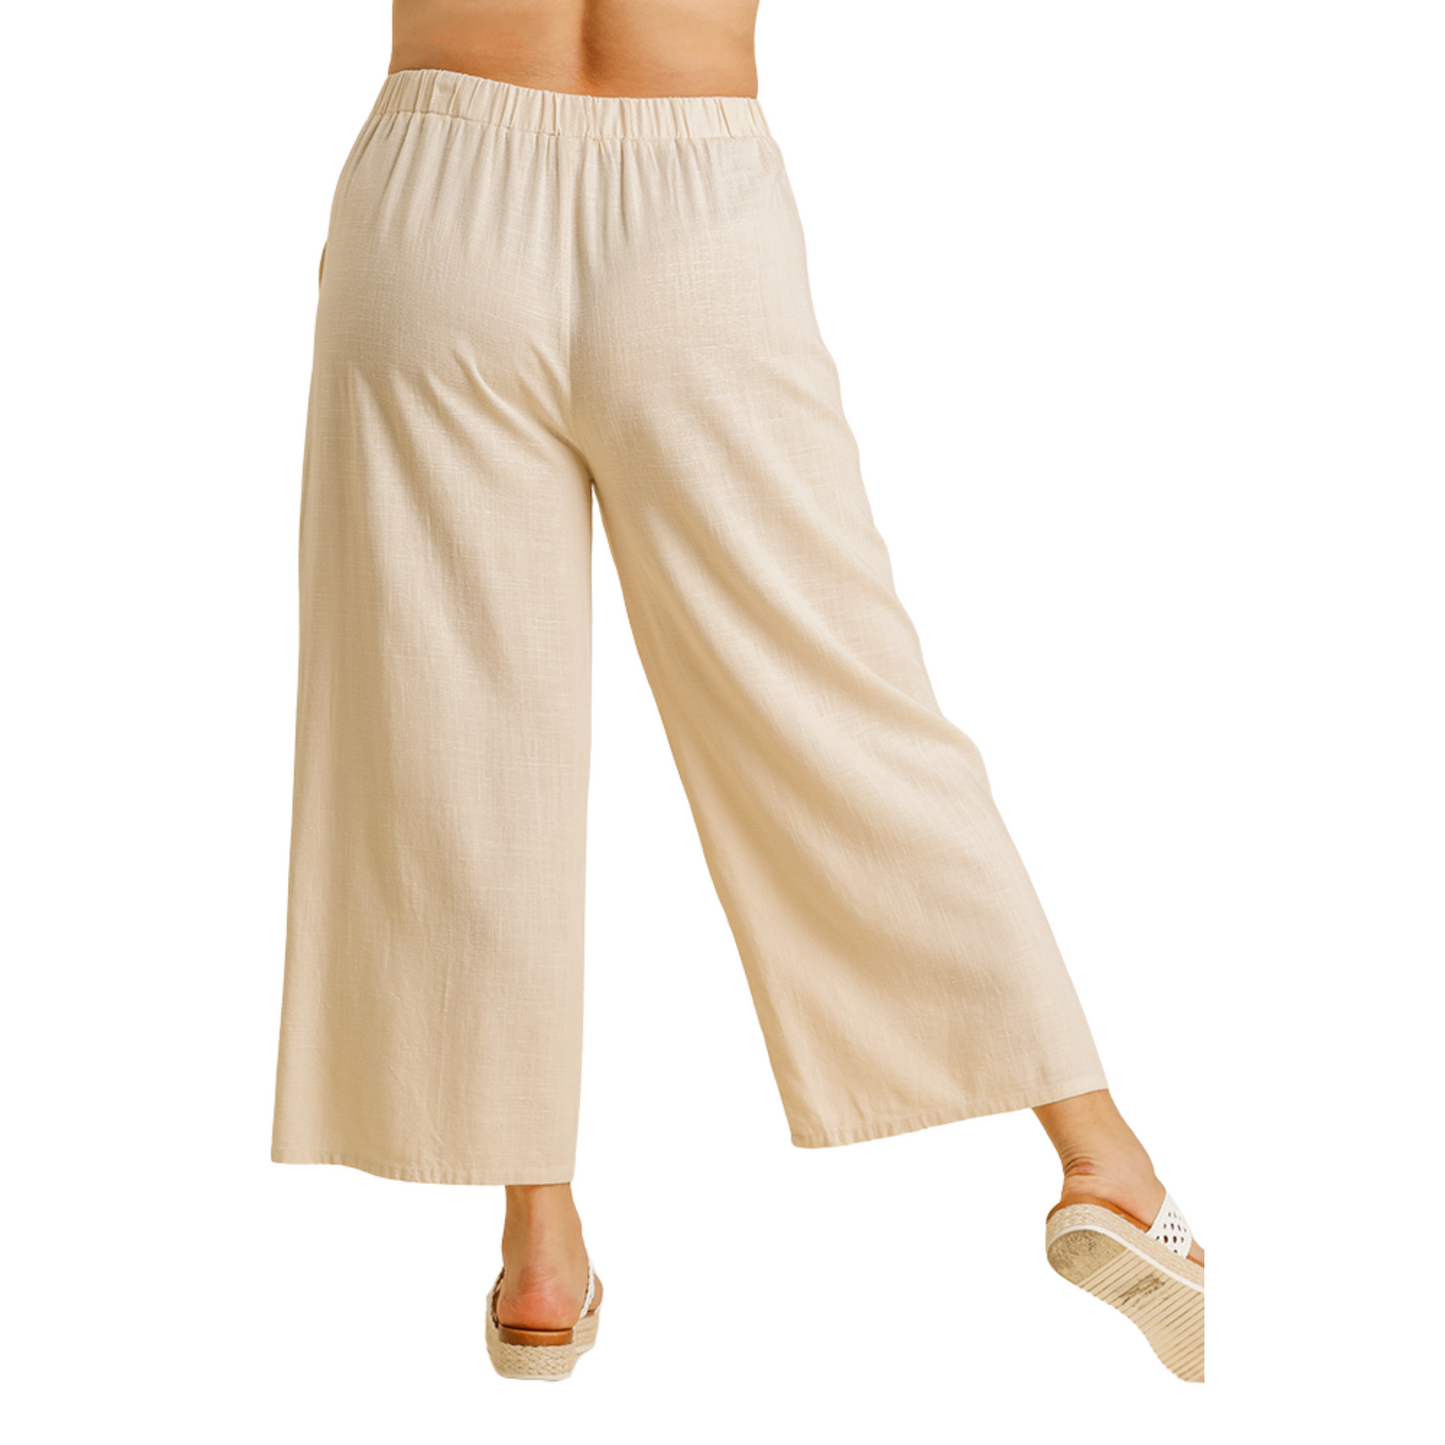 Our Linen Blend Wide Leg Pants are the perfect choice for an effortless chic look! Crafted with a breathable linen blend fabric, these pants are available in classic blue and cream colors with a drawstring for adjustable fit. Wear them for summer days or to any casual occasion for timeless sophistication.